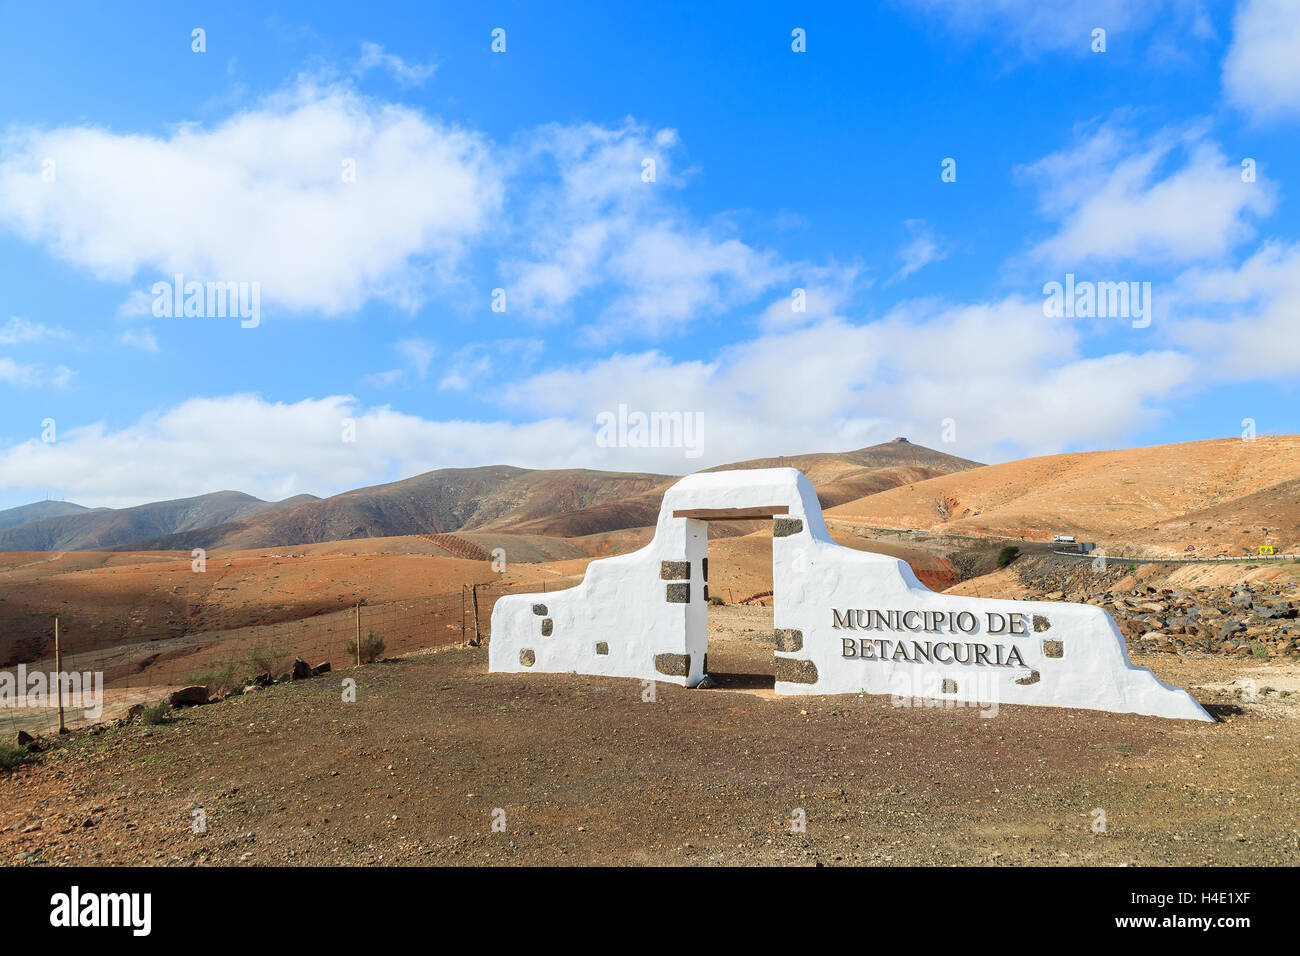 Traditionall municipality sign (white arch gate) near Betancuria village with desert landscape in the background, Fuerteventura, Canary Islands, Spain Stock Photo